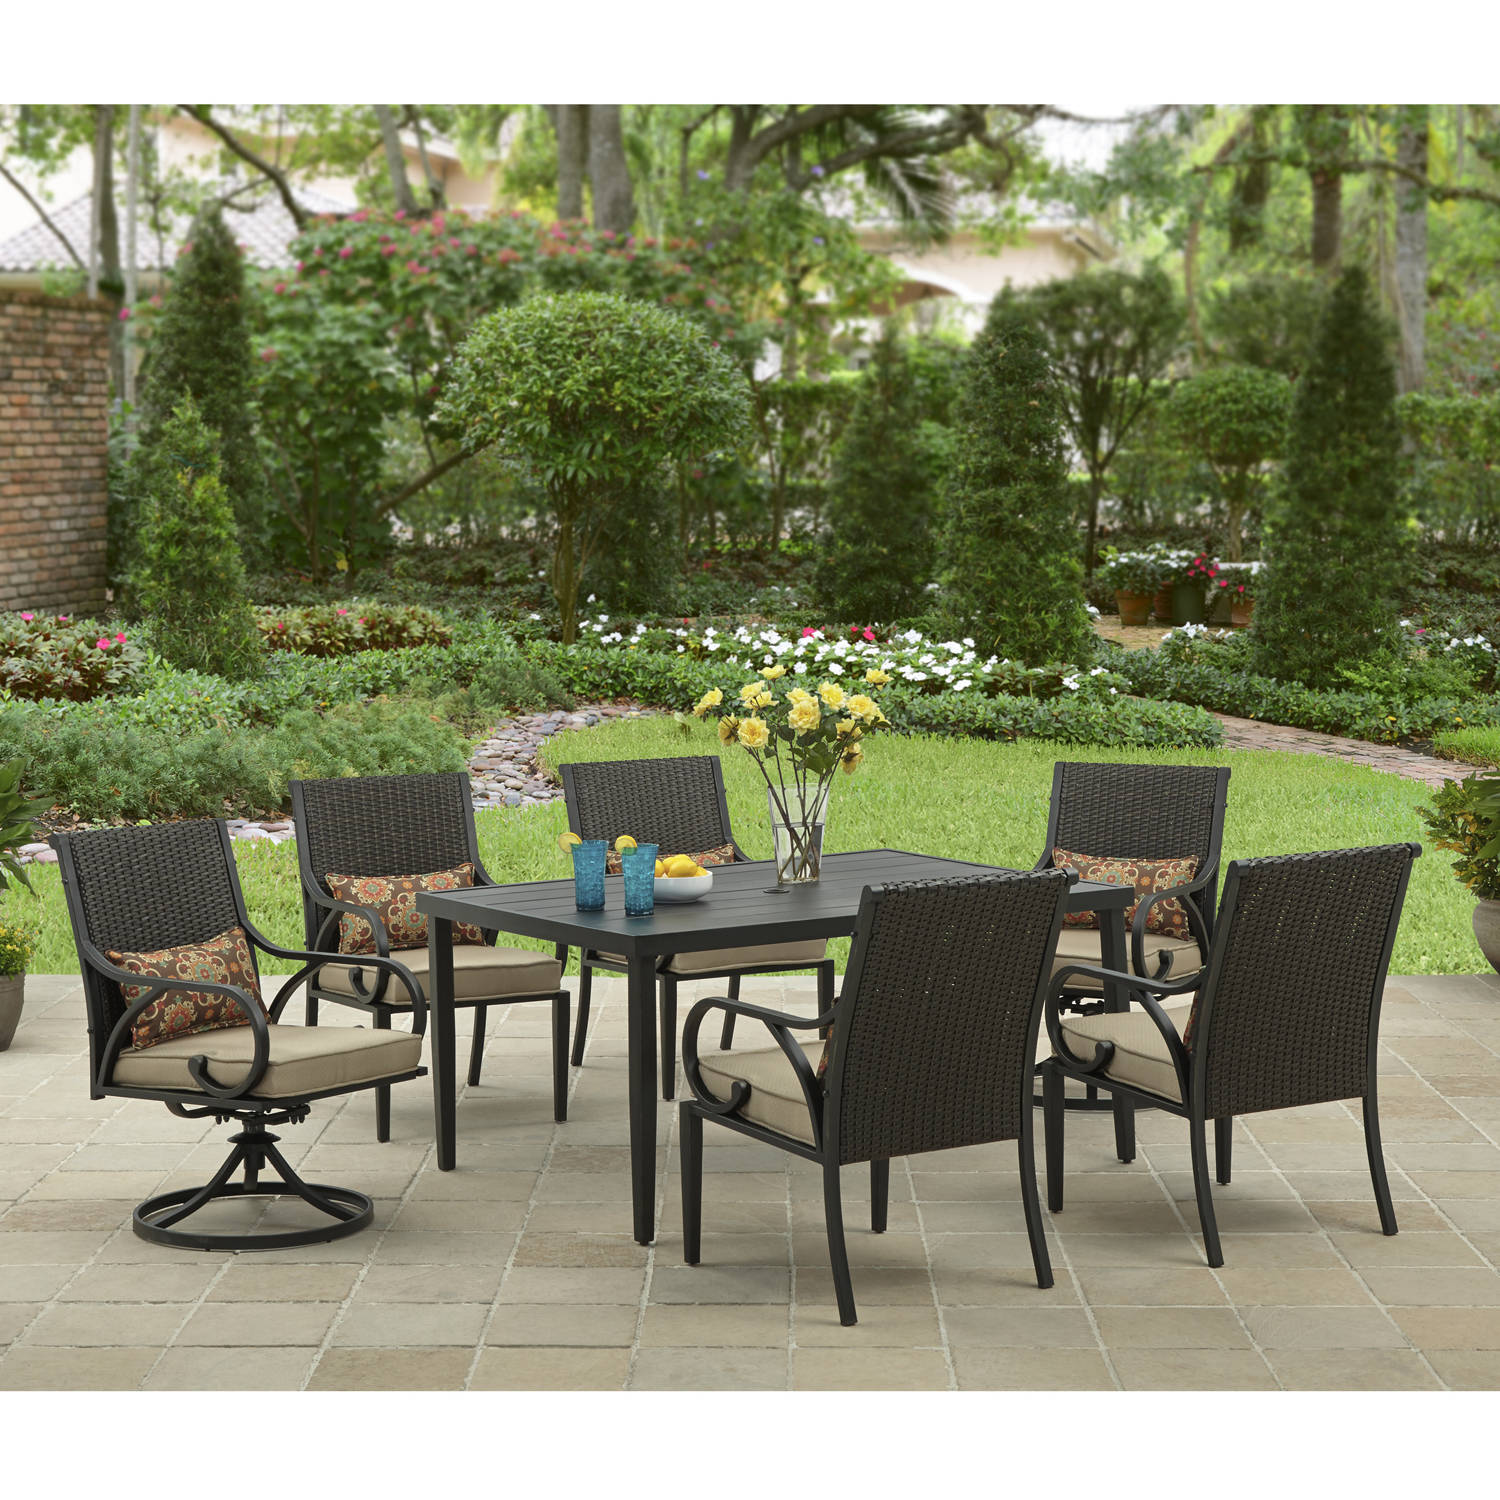 Better Homes and Gardens Layton Ridge Outdoor Dining Chair, Set of 6 - image 2 of 2